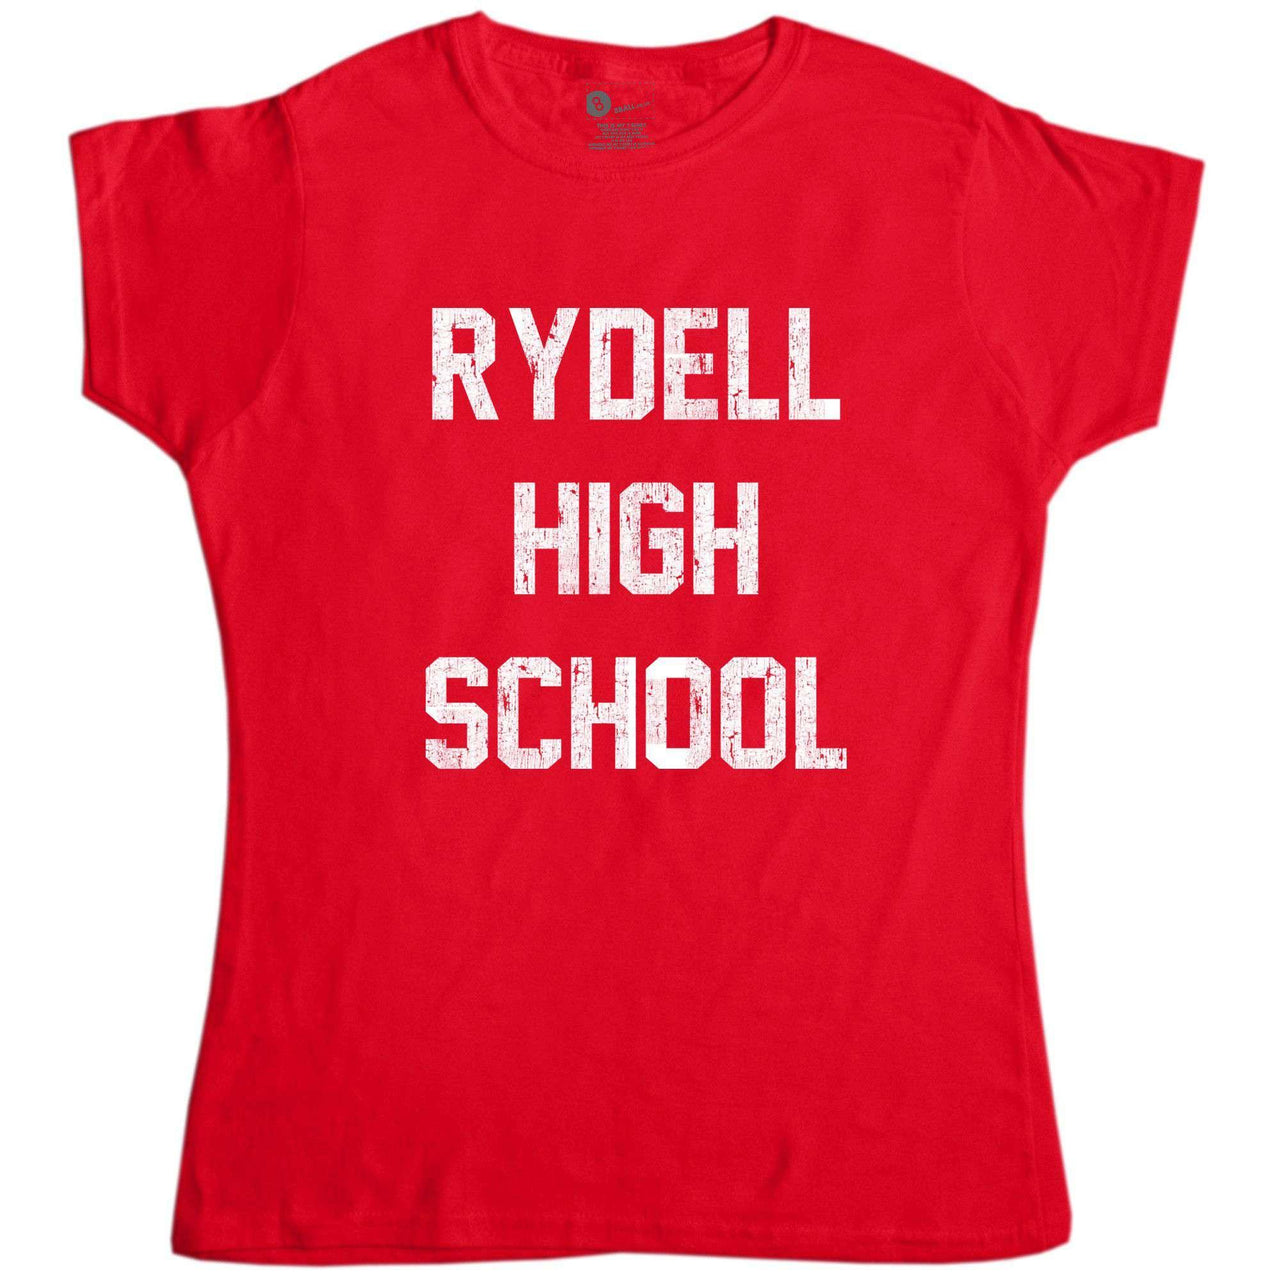 Rydell High Gym And Track Womens Fitted T-Shirt, Inspired By Grease 8Ball